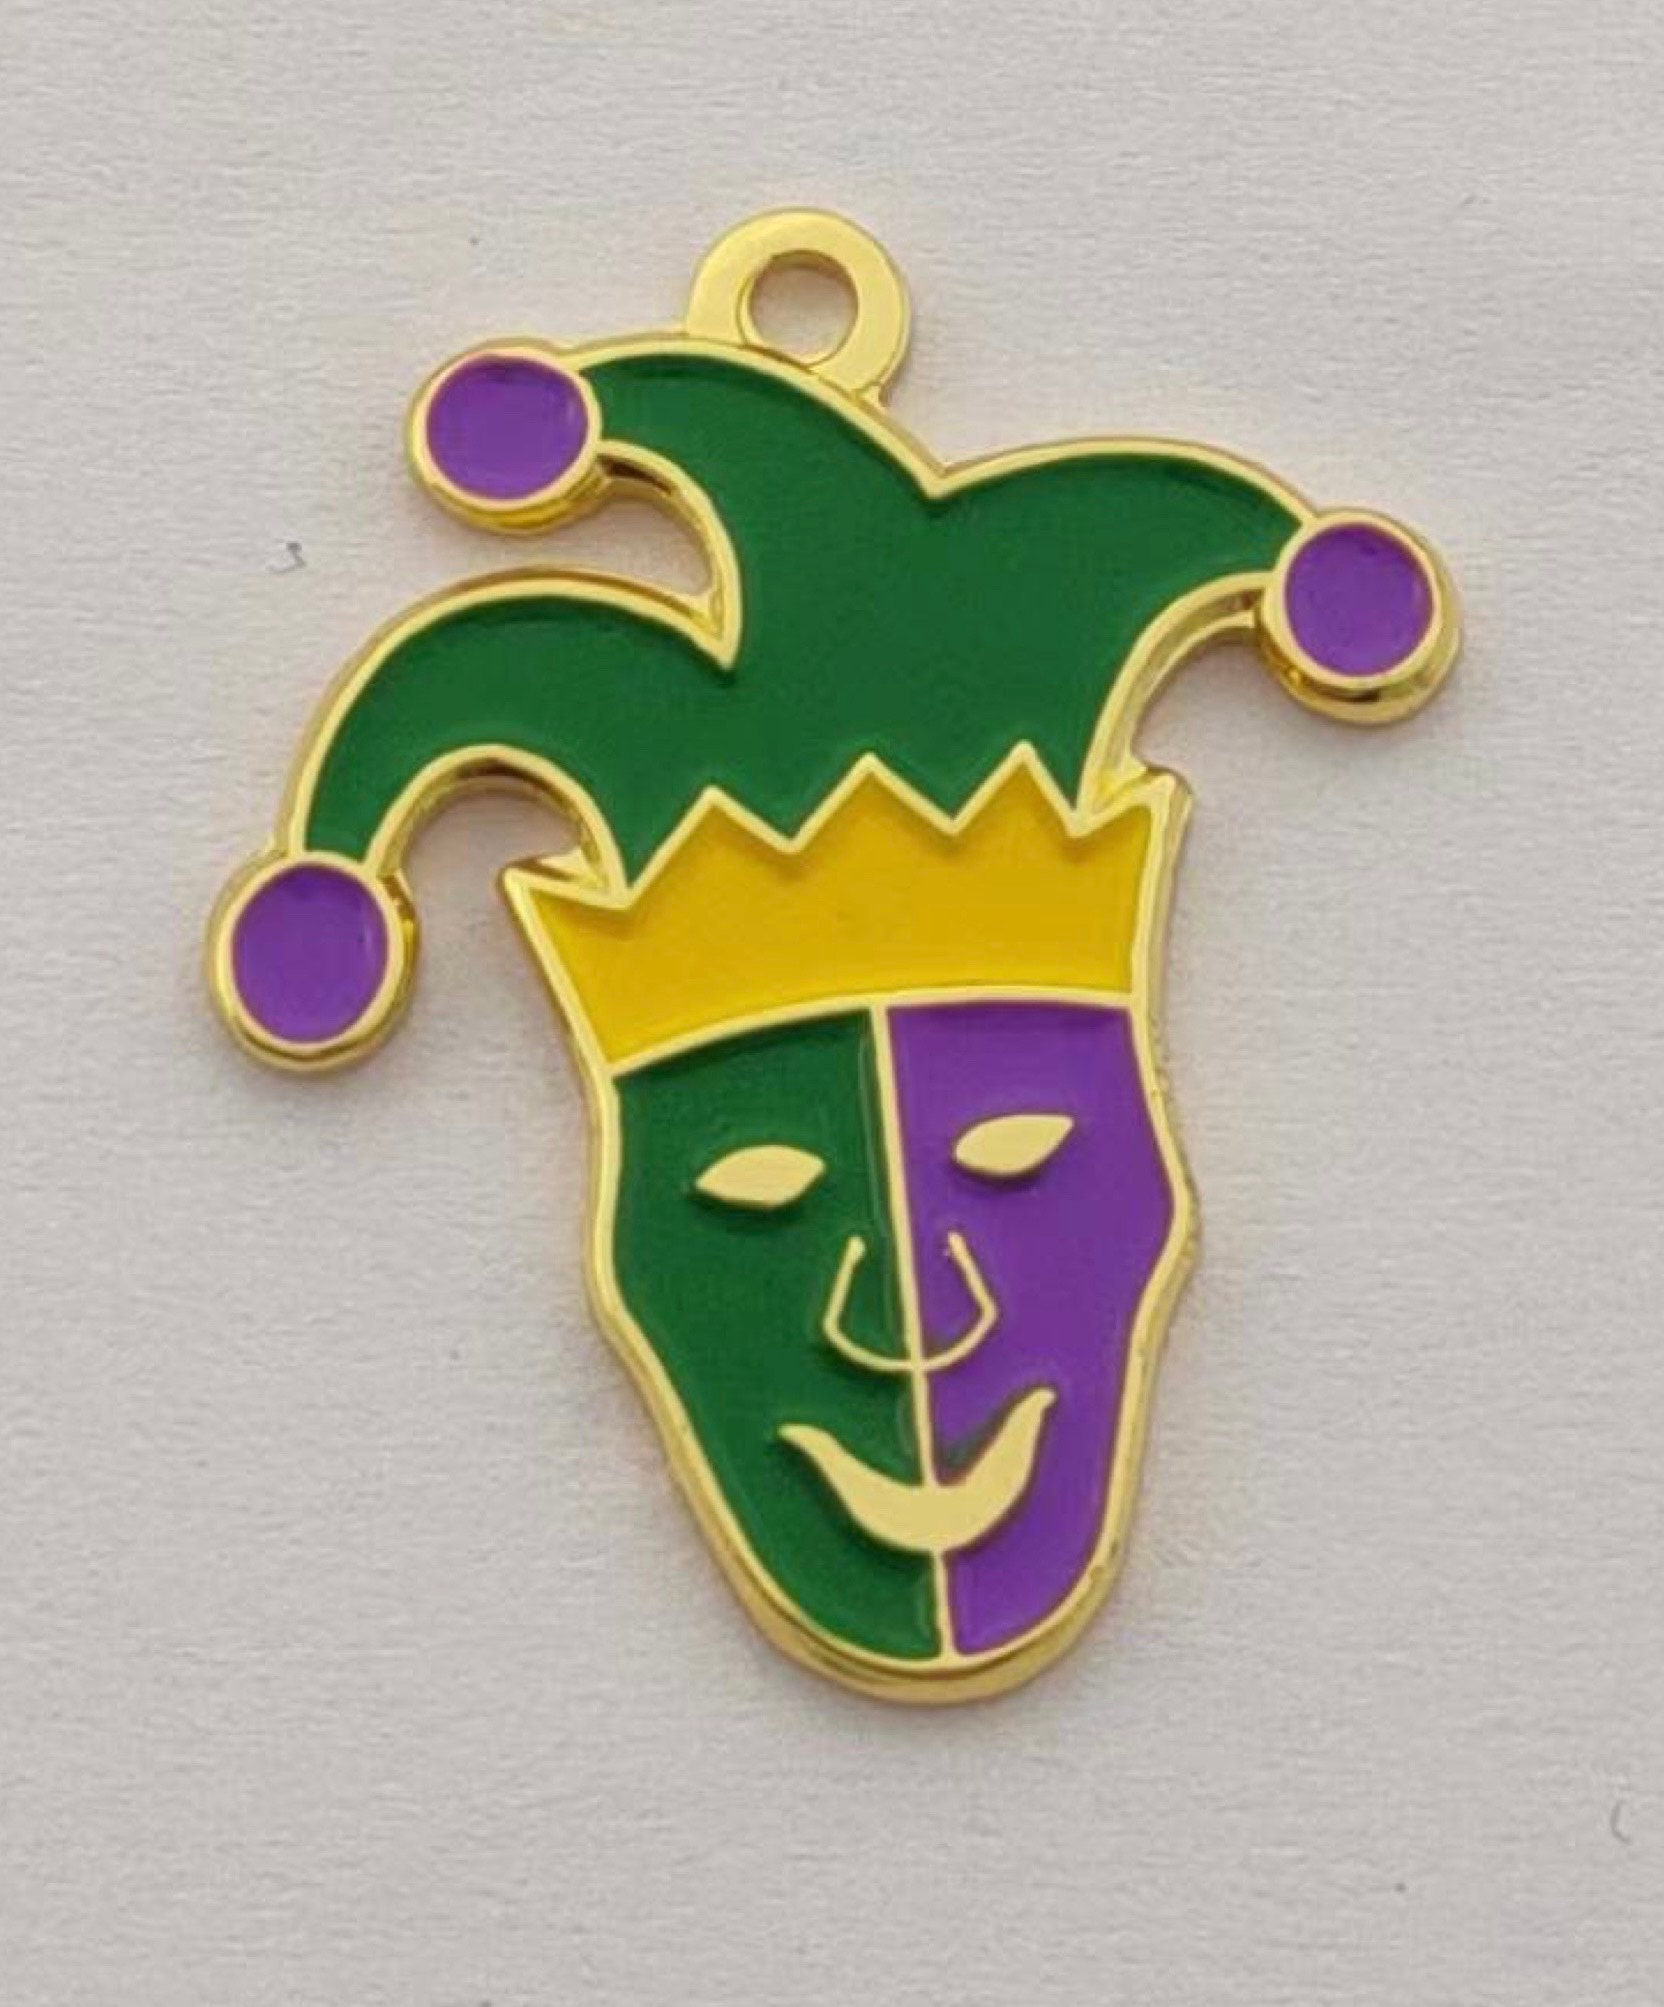 mardi gras charms, mardi gras charms Suppliers and Manufacturers